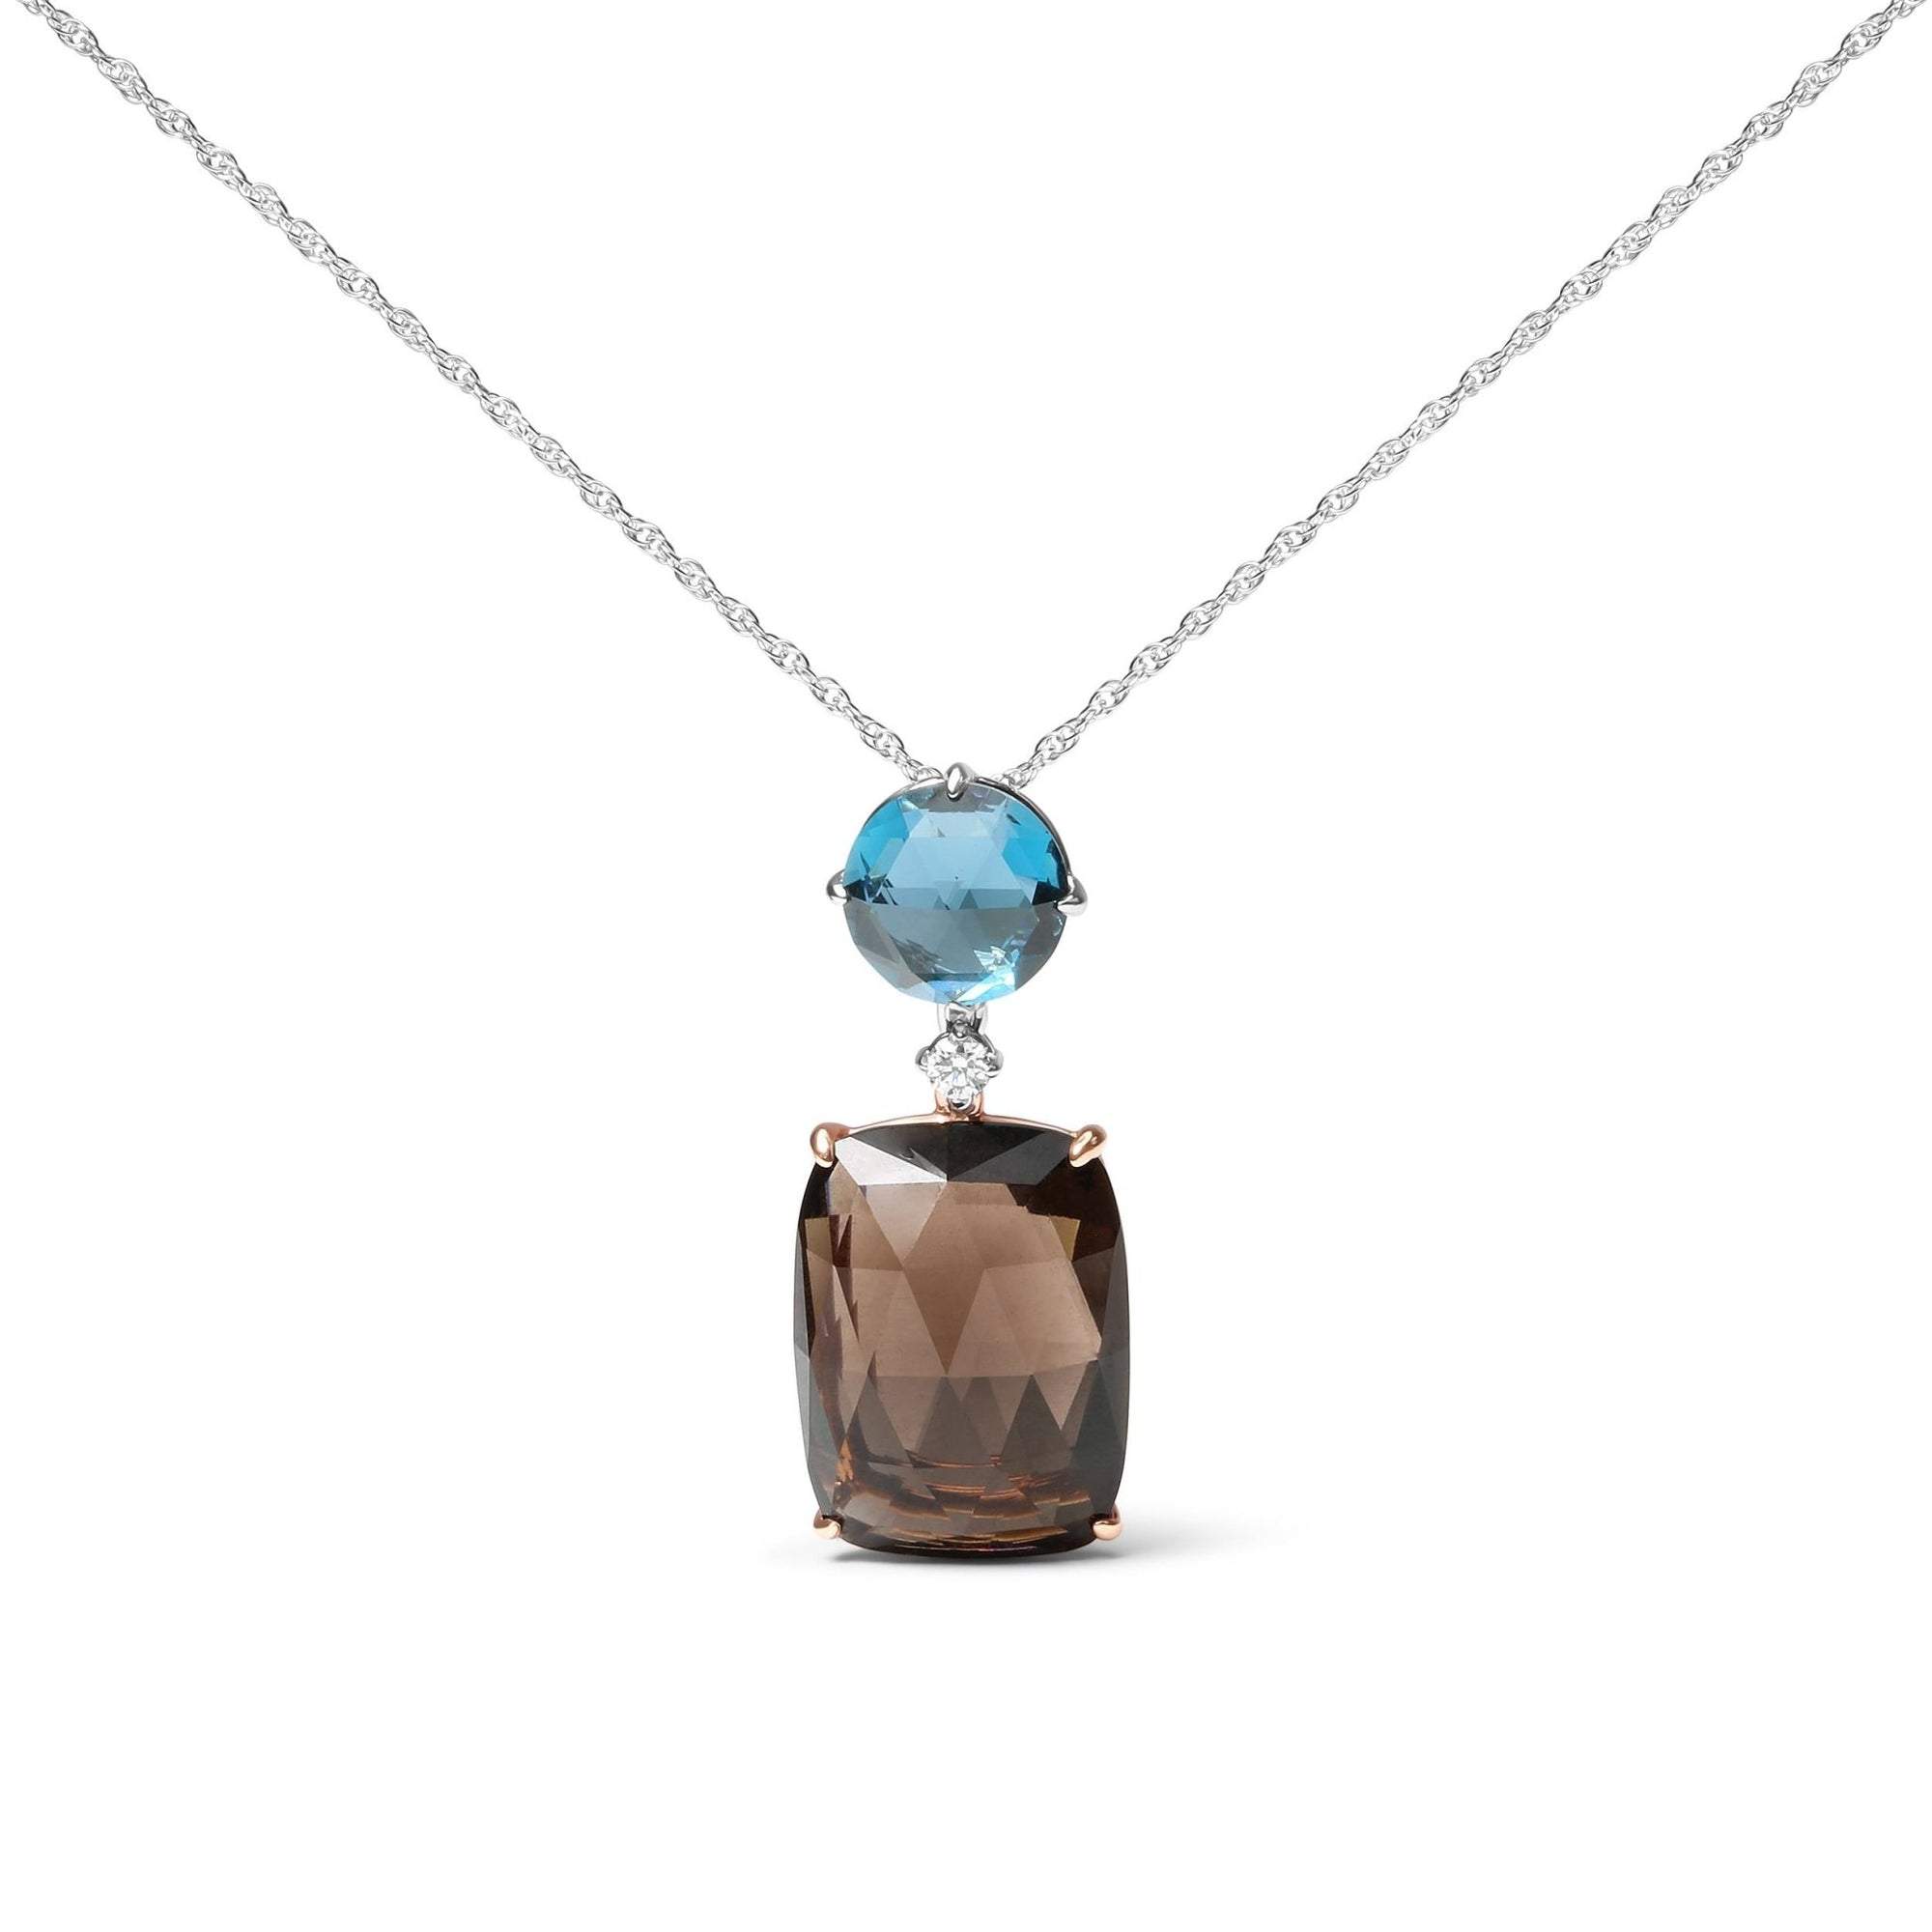 18K Rose and White Gold Diamond Accent and London Blue Topaz and Cushion Cut Smoky Quartz Gemstone Dangle Drop 18" Pendant Necklace (G-H Color, SI1-SI2 Clarity) - LinkagejewelrydesignLinkagejewelrydesign